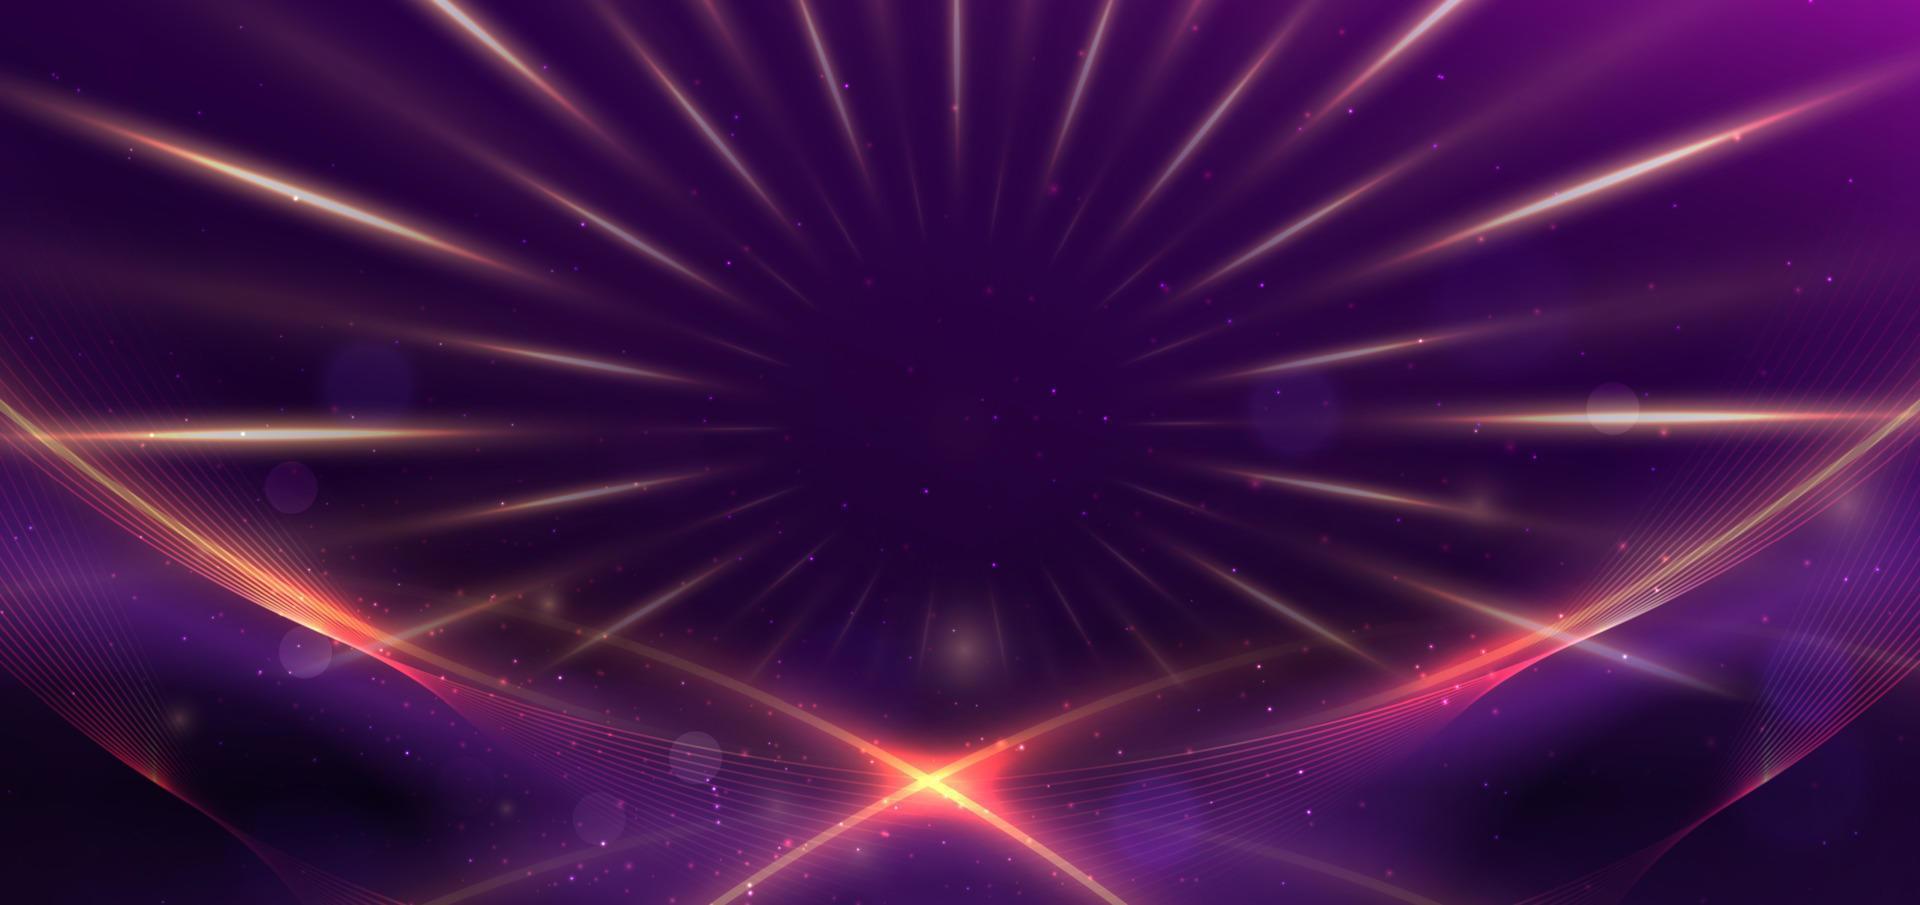 Luxury dark purple background with golden line curved and lighting effect sparkle. vector